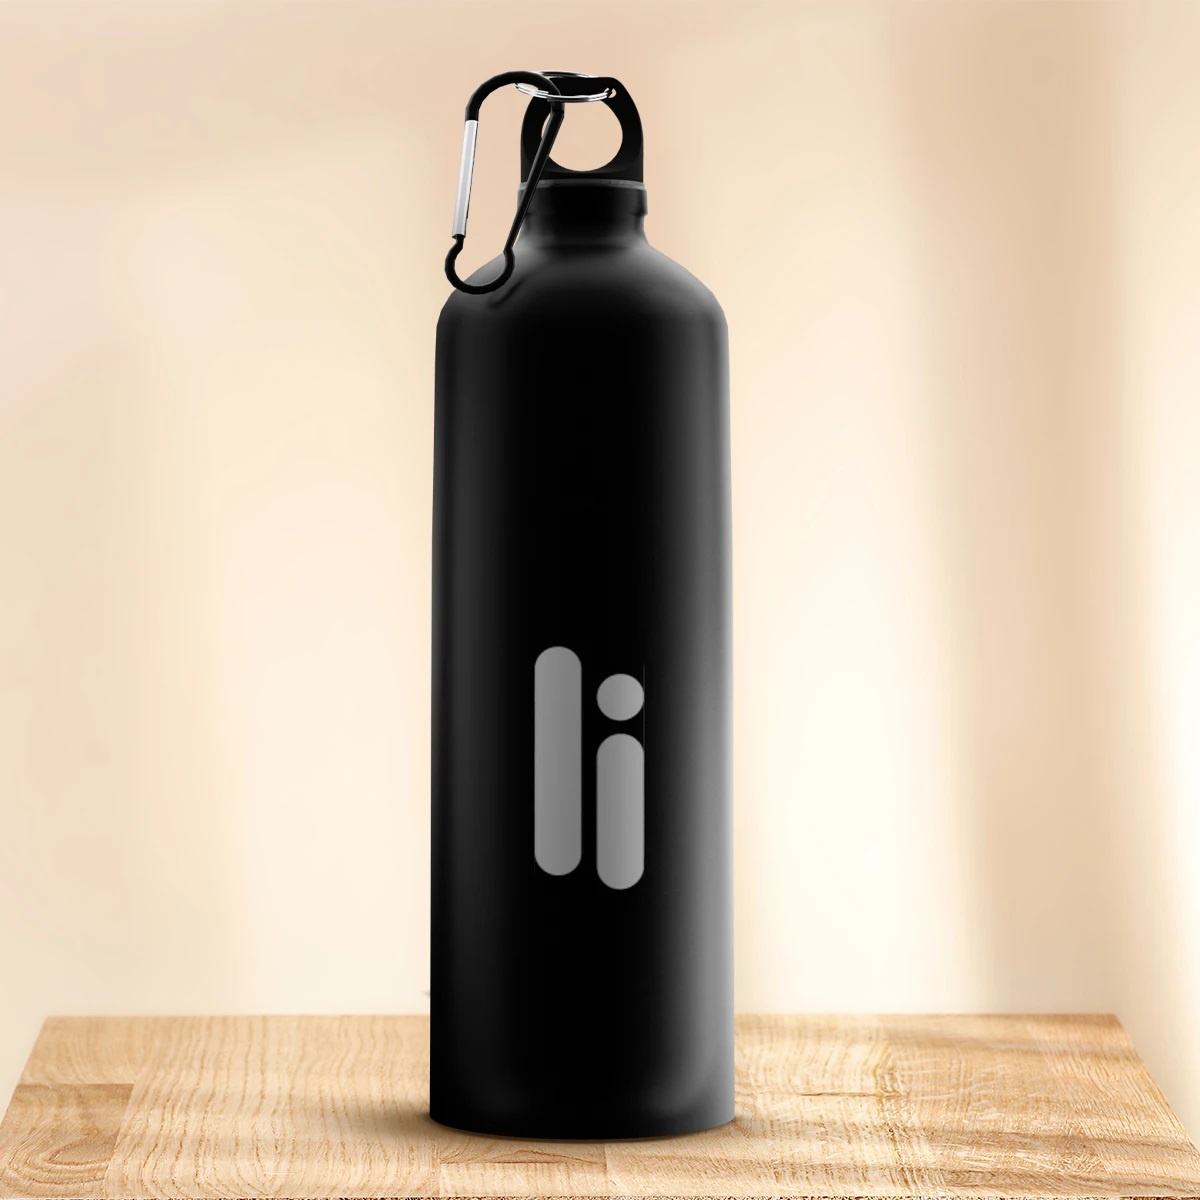 Customized Water Bottles: Adding Personal Touch to Hydration